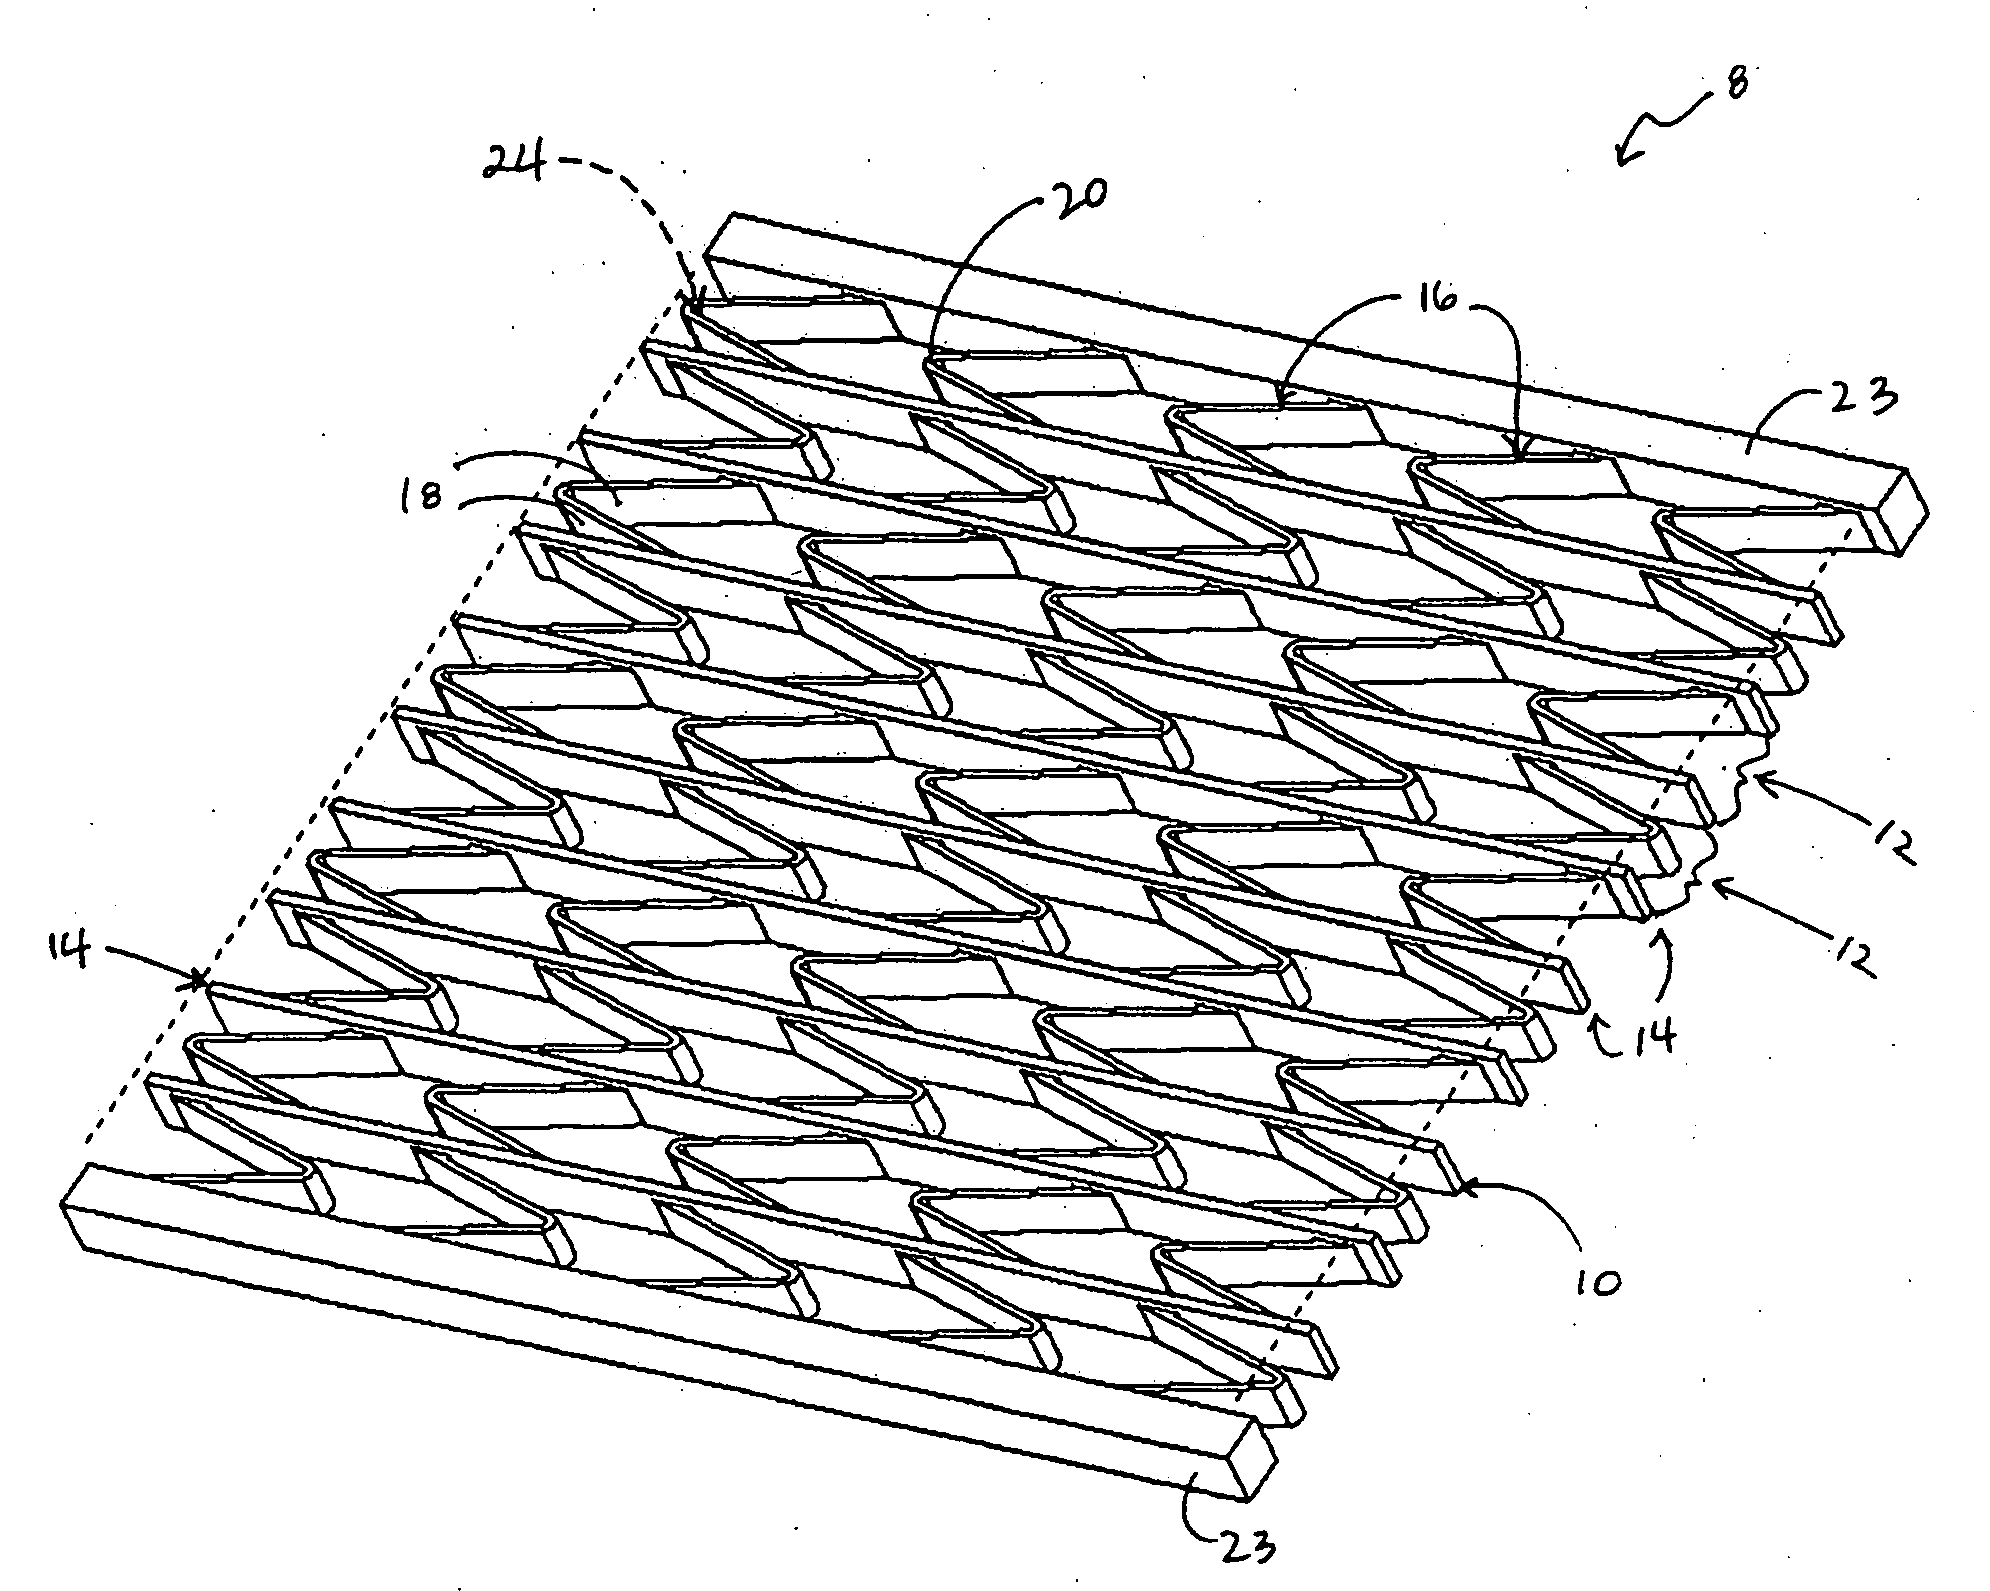 Cellular support structures used for controlled actuation of fluid contact surfaces